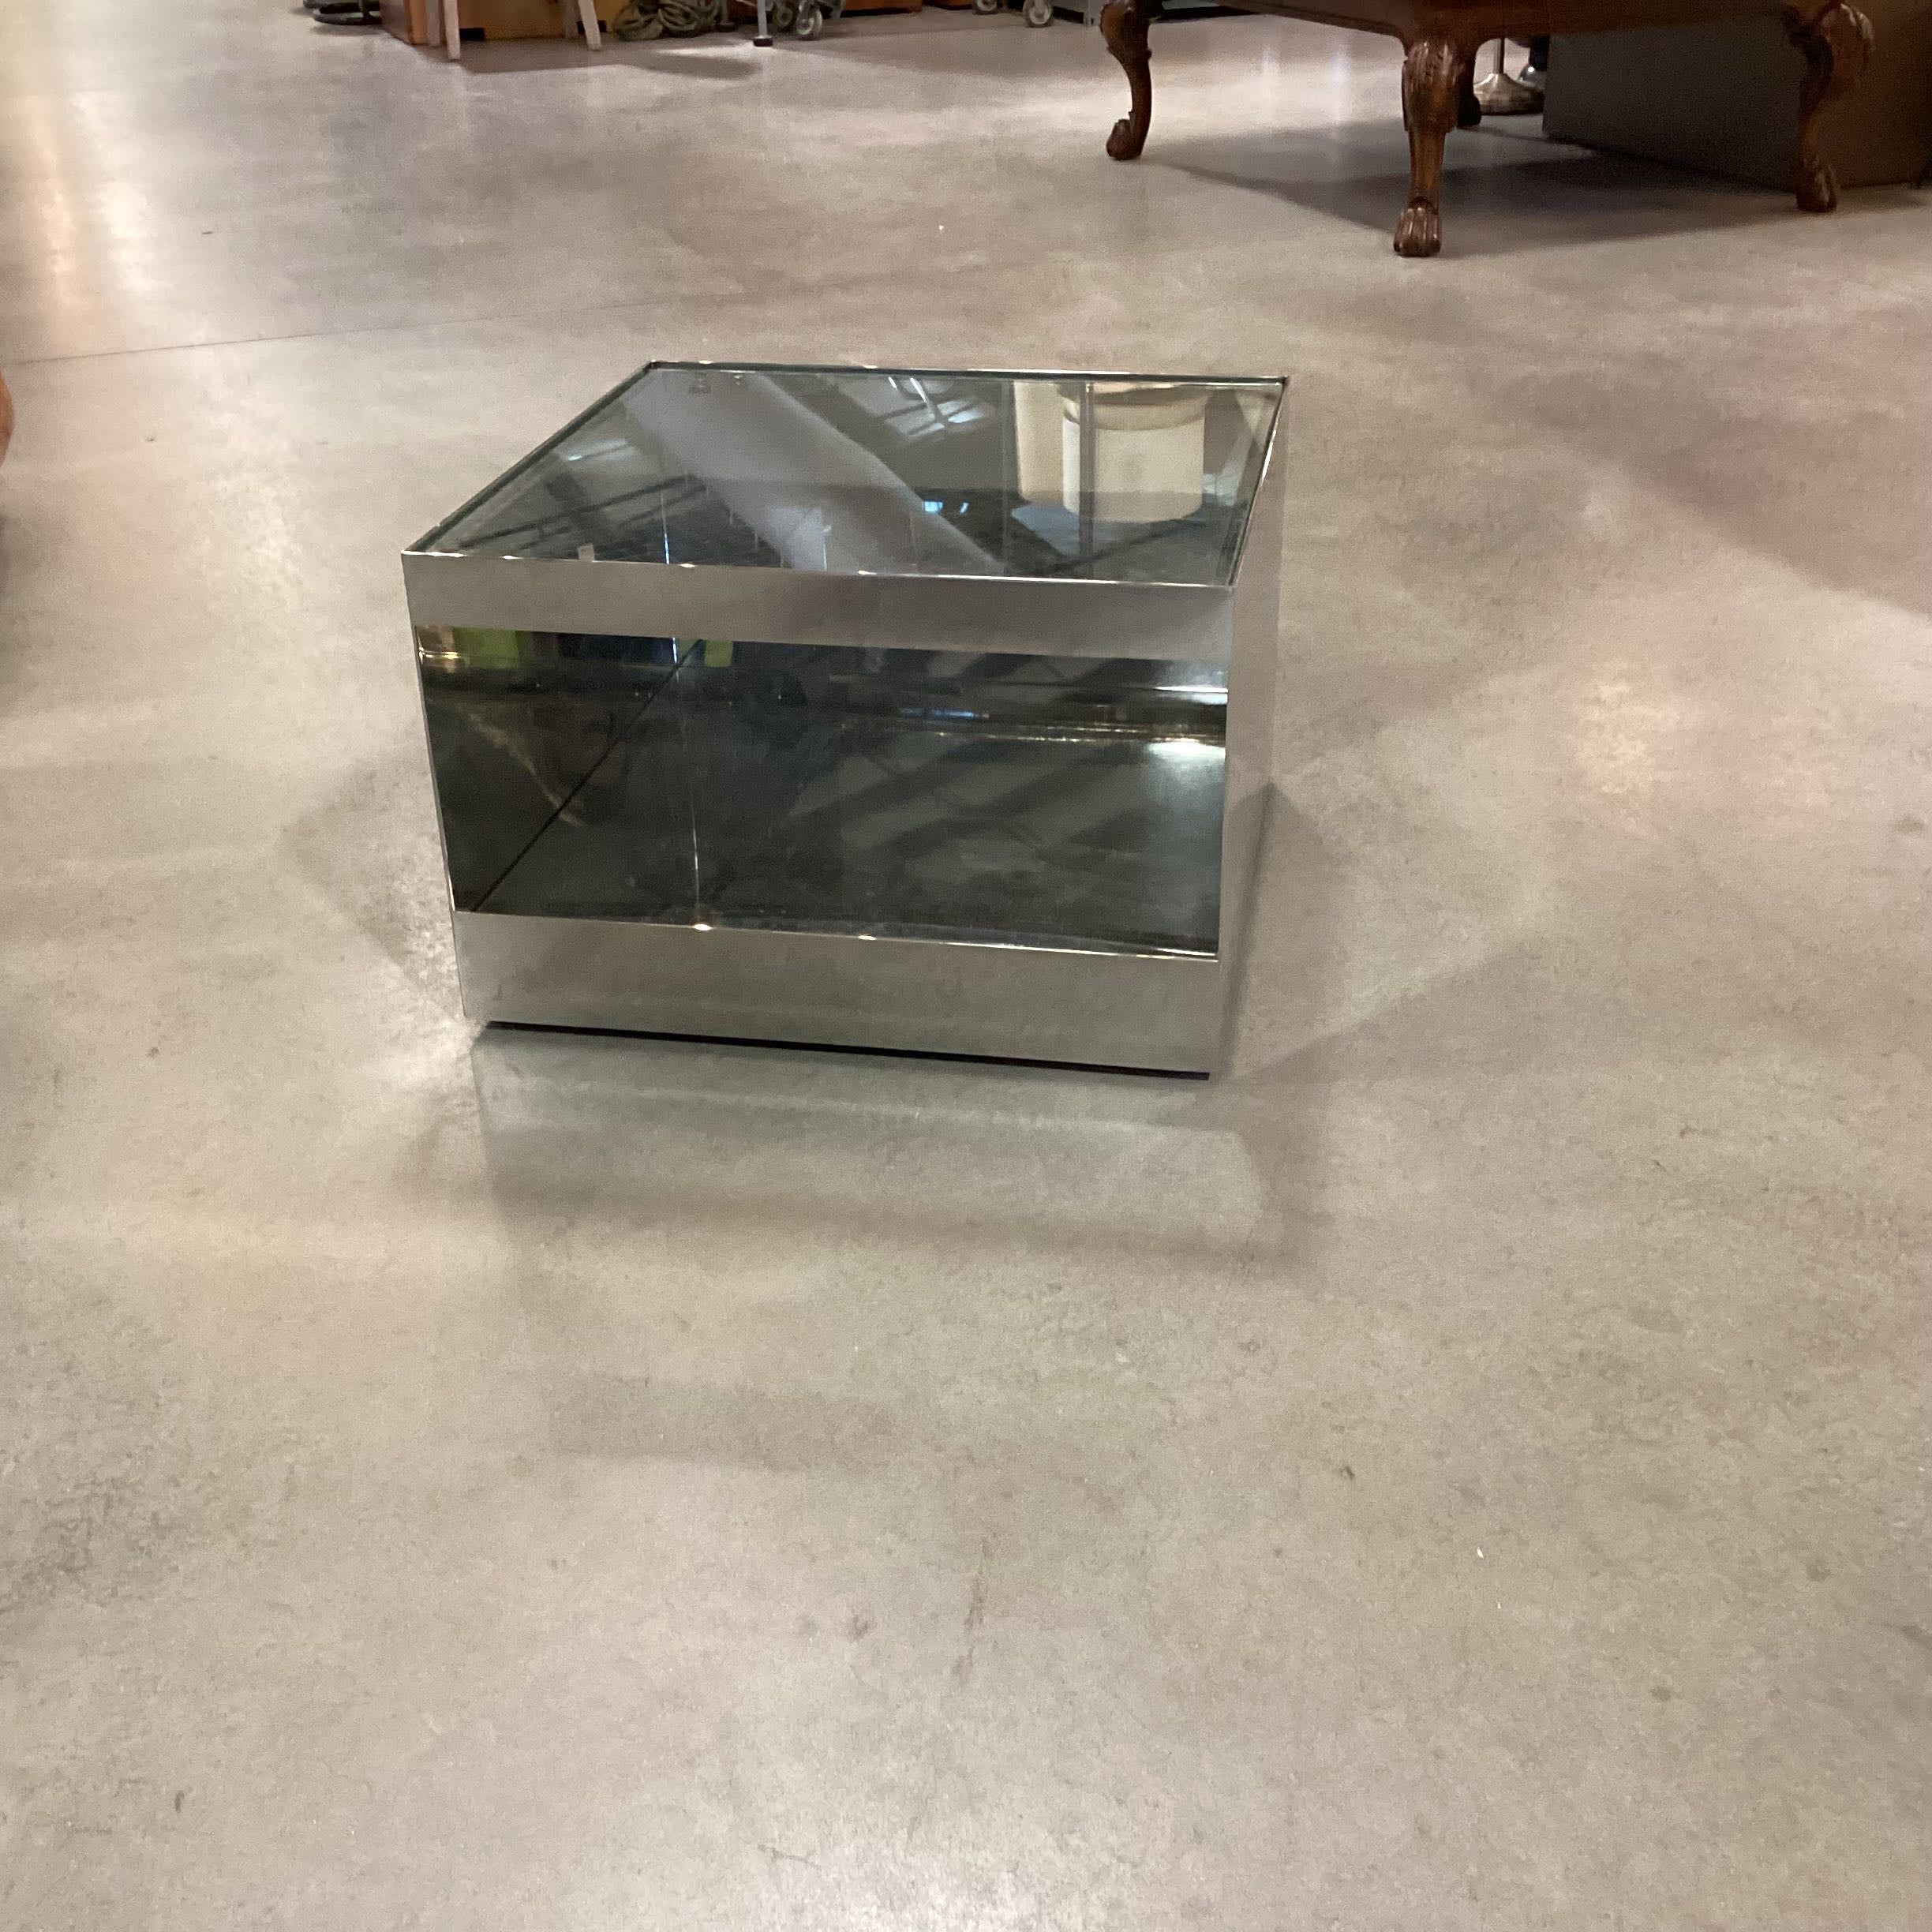 Knoll Furniture by Joe D'Urso 1980's Low Rolling Glass End Table